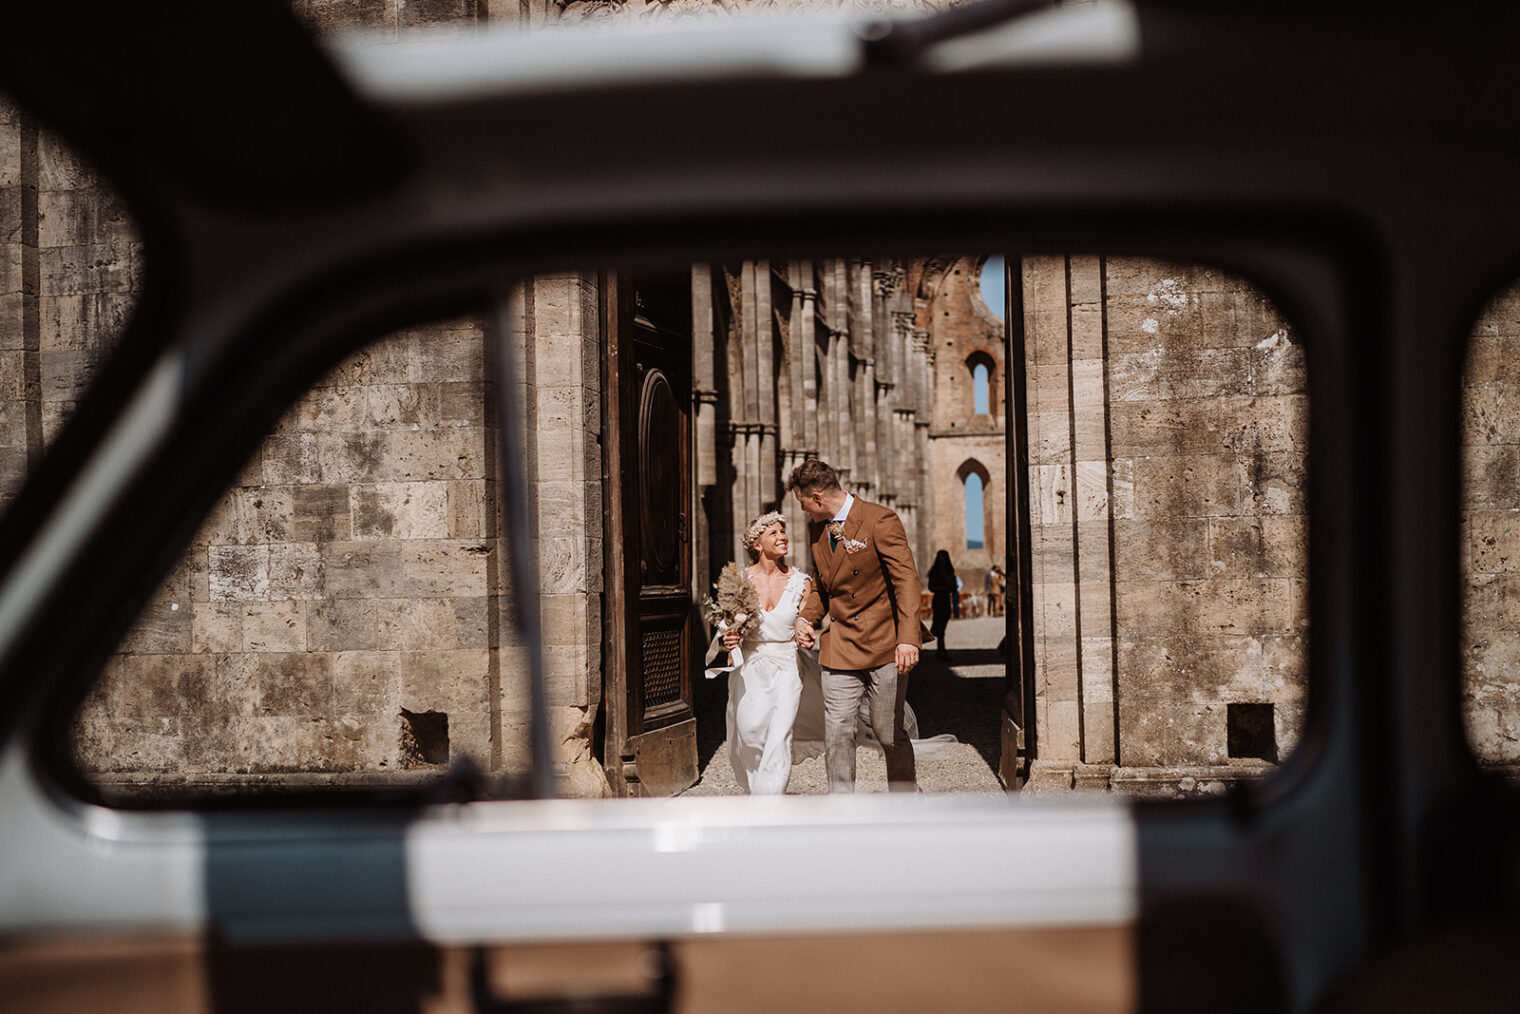 The photo captures a couple walking outside the stunning San Galgano Abbey, with the view being captured through the glass of an old 500 car. The couple is walking hand in hand, the man is wearing a brown suit and the woman is wearing a white wedding dress. They look happy and in love, deep in conversation as they walk. The abbey is visible in the background, its ancient stone walls and Gothic architecture providing a striking contrast to the couple's modern attire. The sun is shining down on the scene, casting a warm glow over the couple and highlighting the intricate details of the abbey's architecture. The car window provides a frame to the picture, giving the sense of a vintage and romantic atmosphere. The use of the car window also gives a sense of movement as if they are on a journey together. Overall the photo conveys a sense of love and history, capturing a special moment in a beautiful and historic setting.